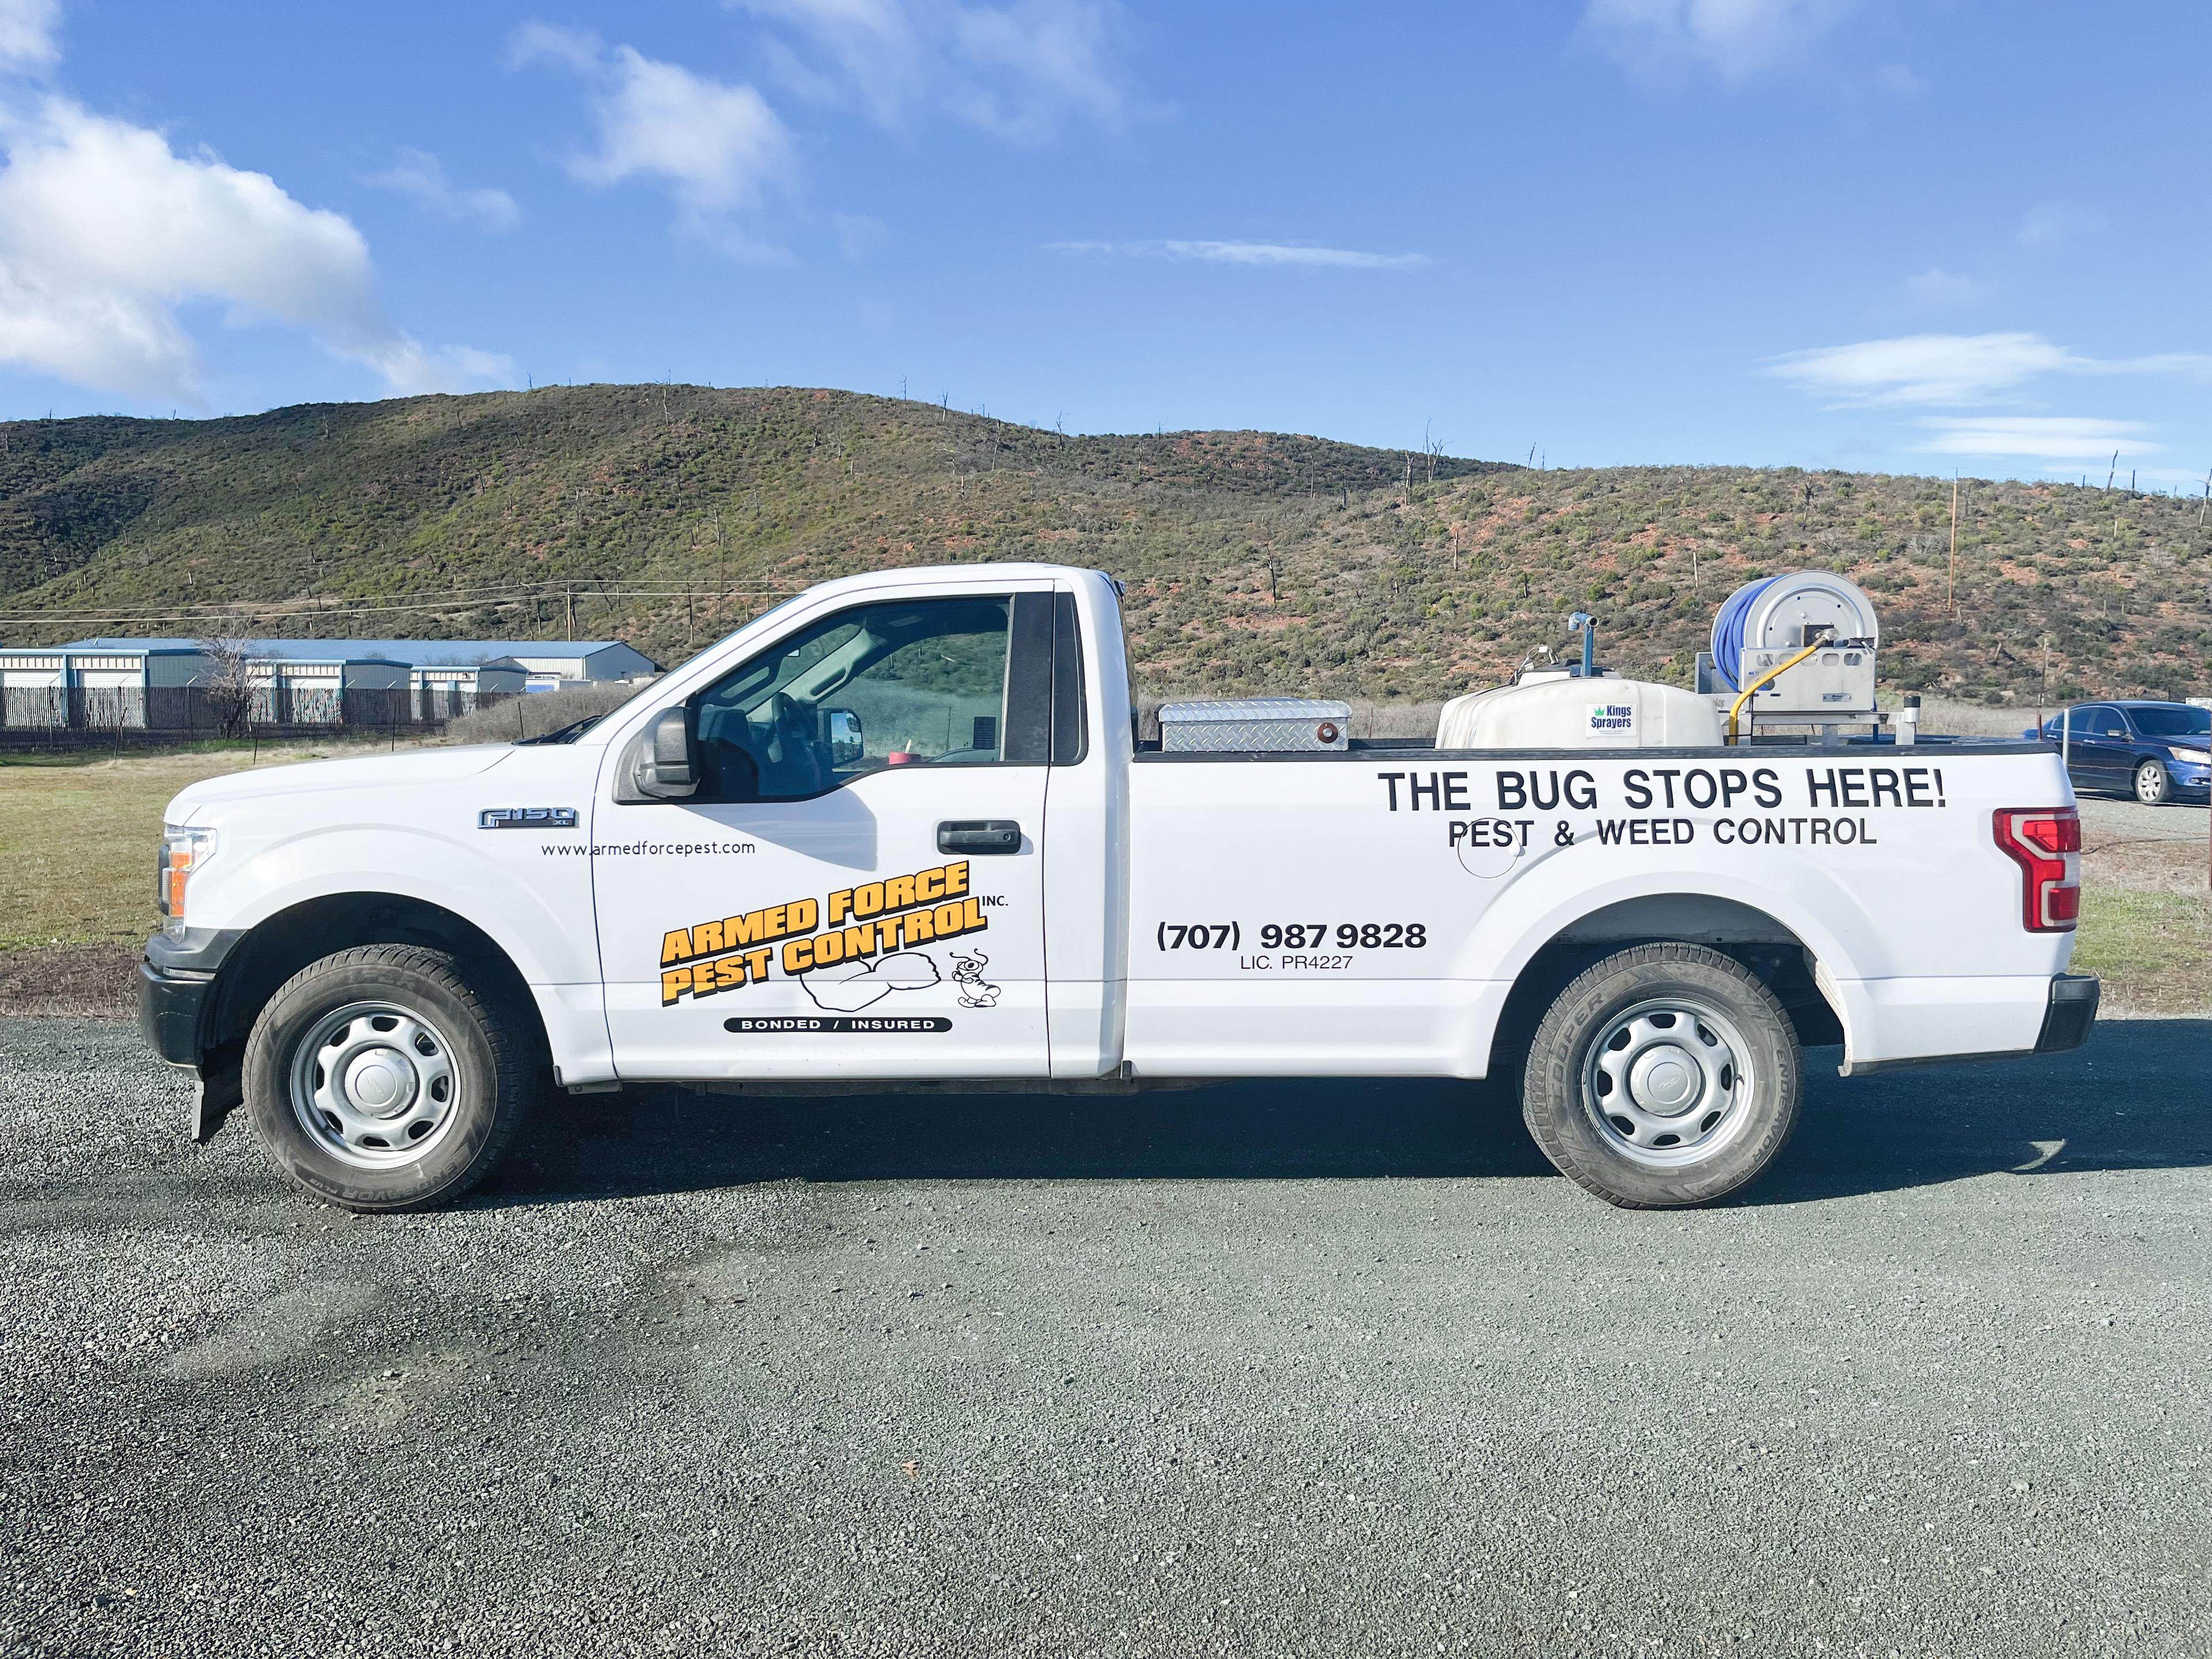 Picture of One of Armed Force Pest Control's service trucks on a recent jobsite - Armed Force Pest Control, Inc.